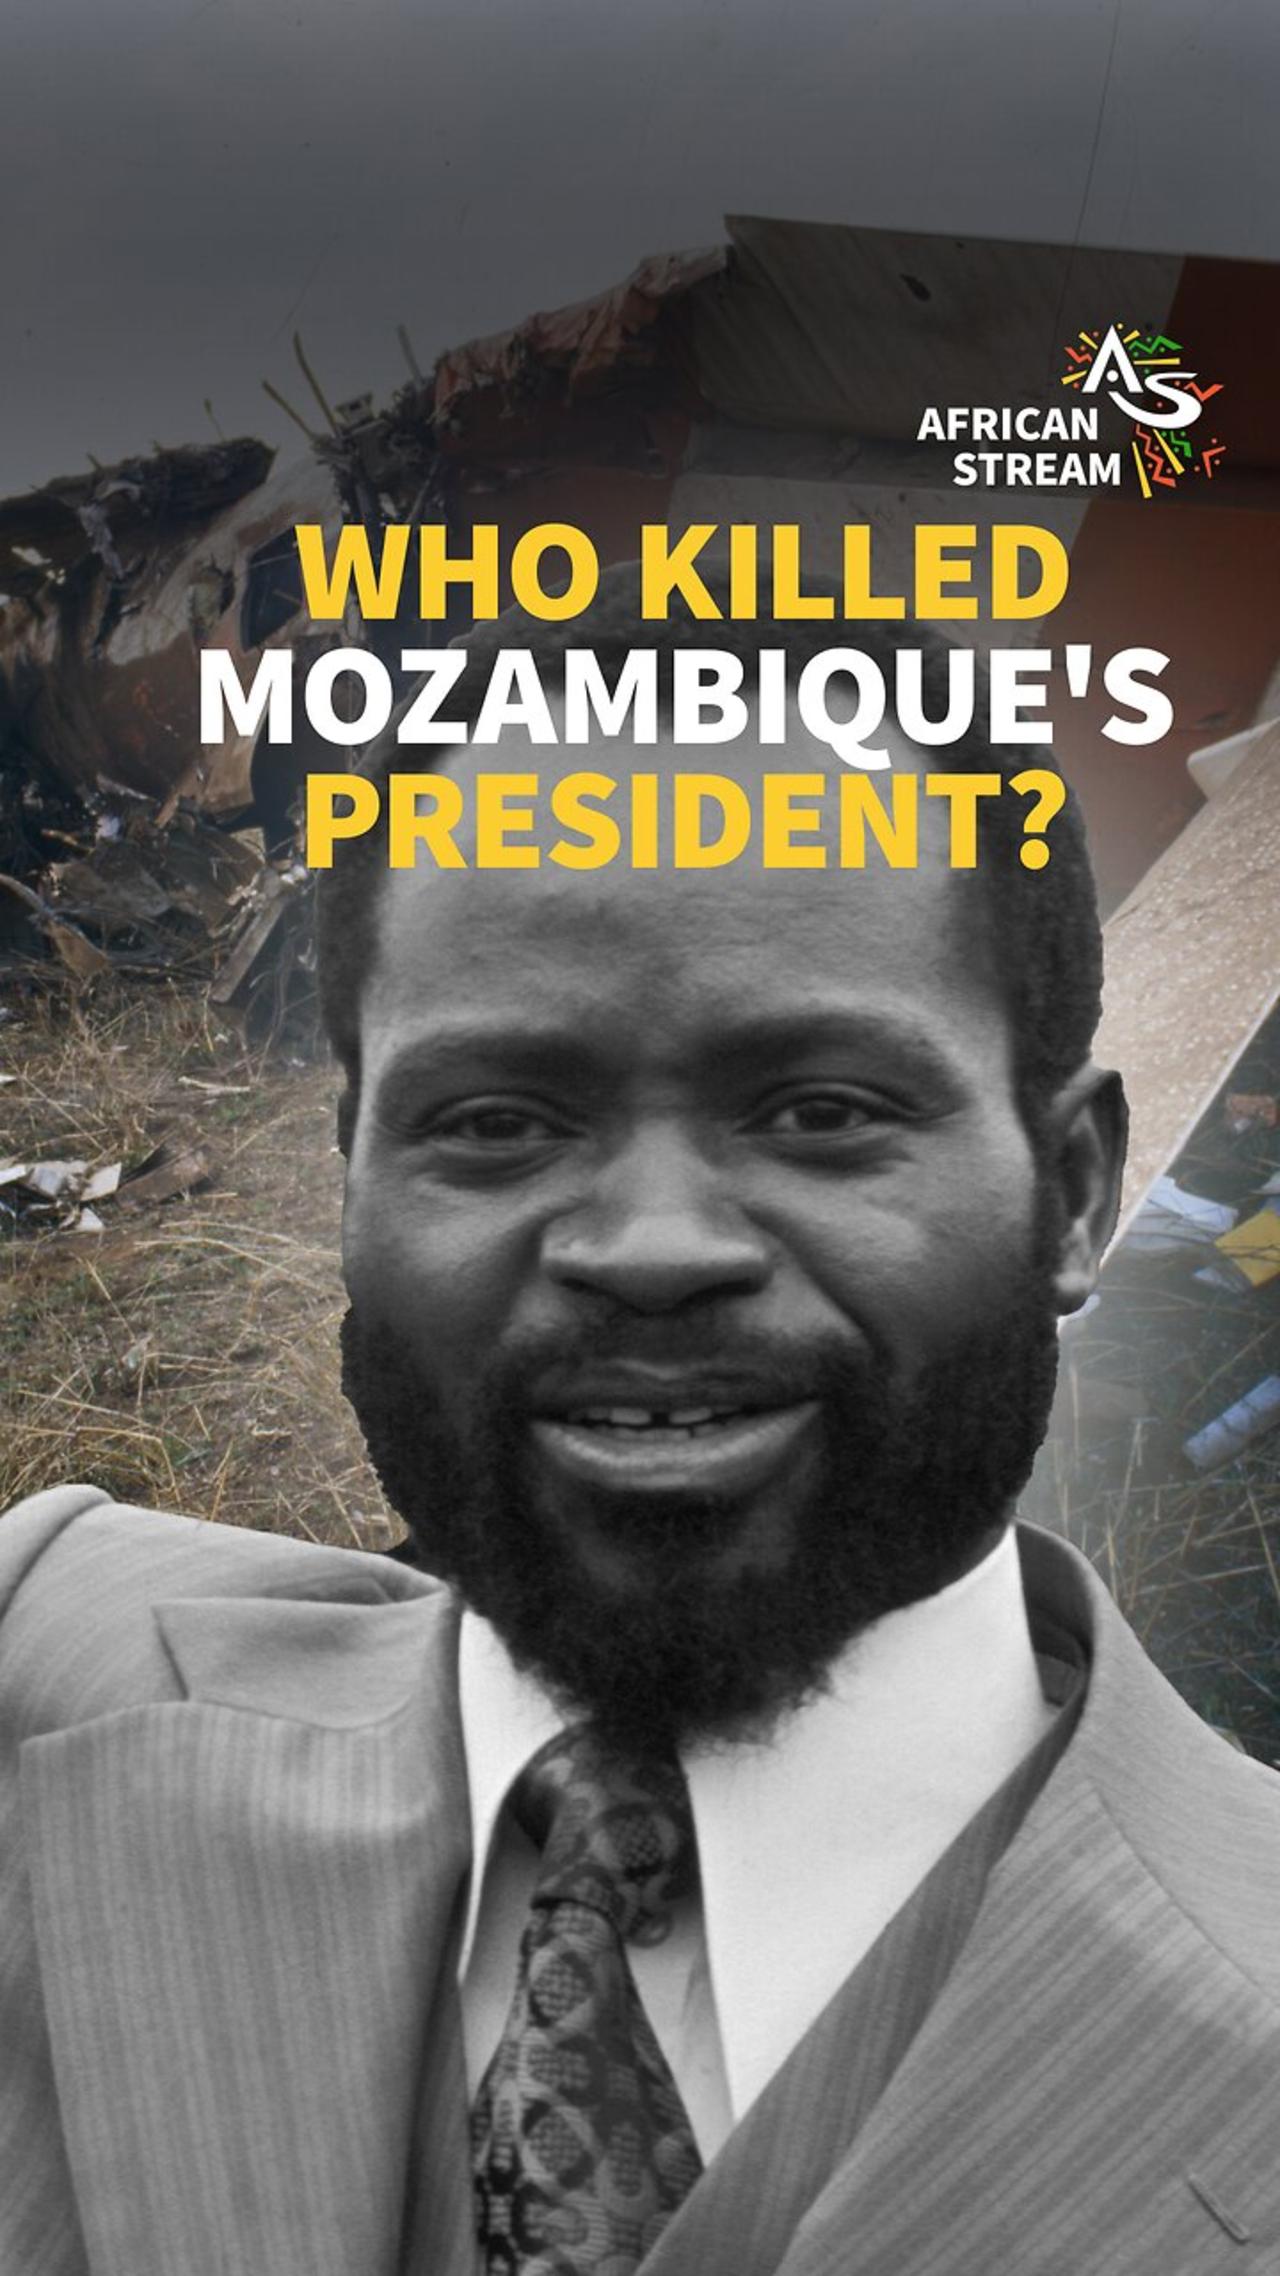 Who Killed Mozambique’s President?